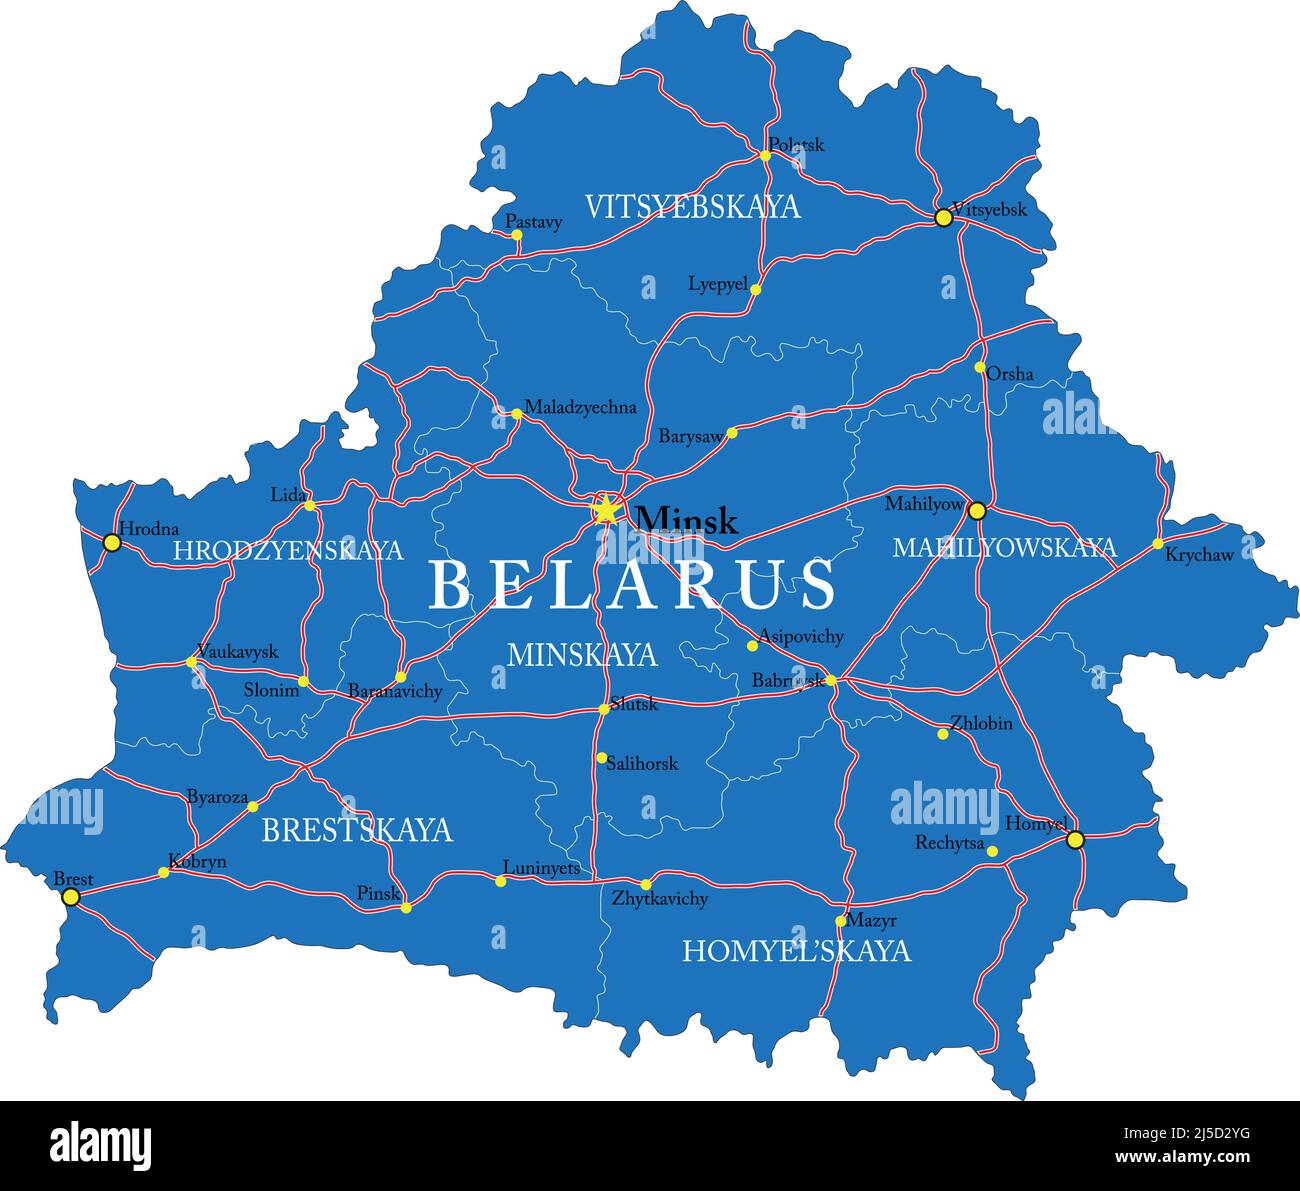 Highly detailed vector map of Belarus with administrative regions, main cities and roads. Stock Vector